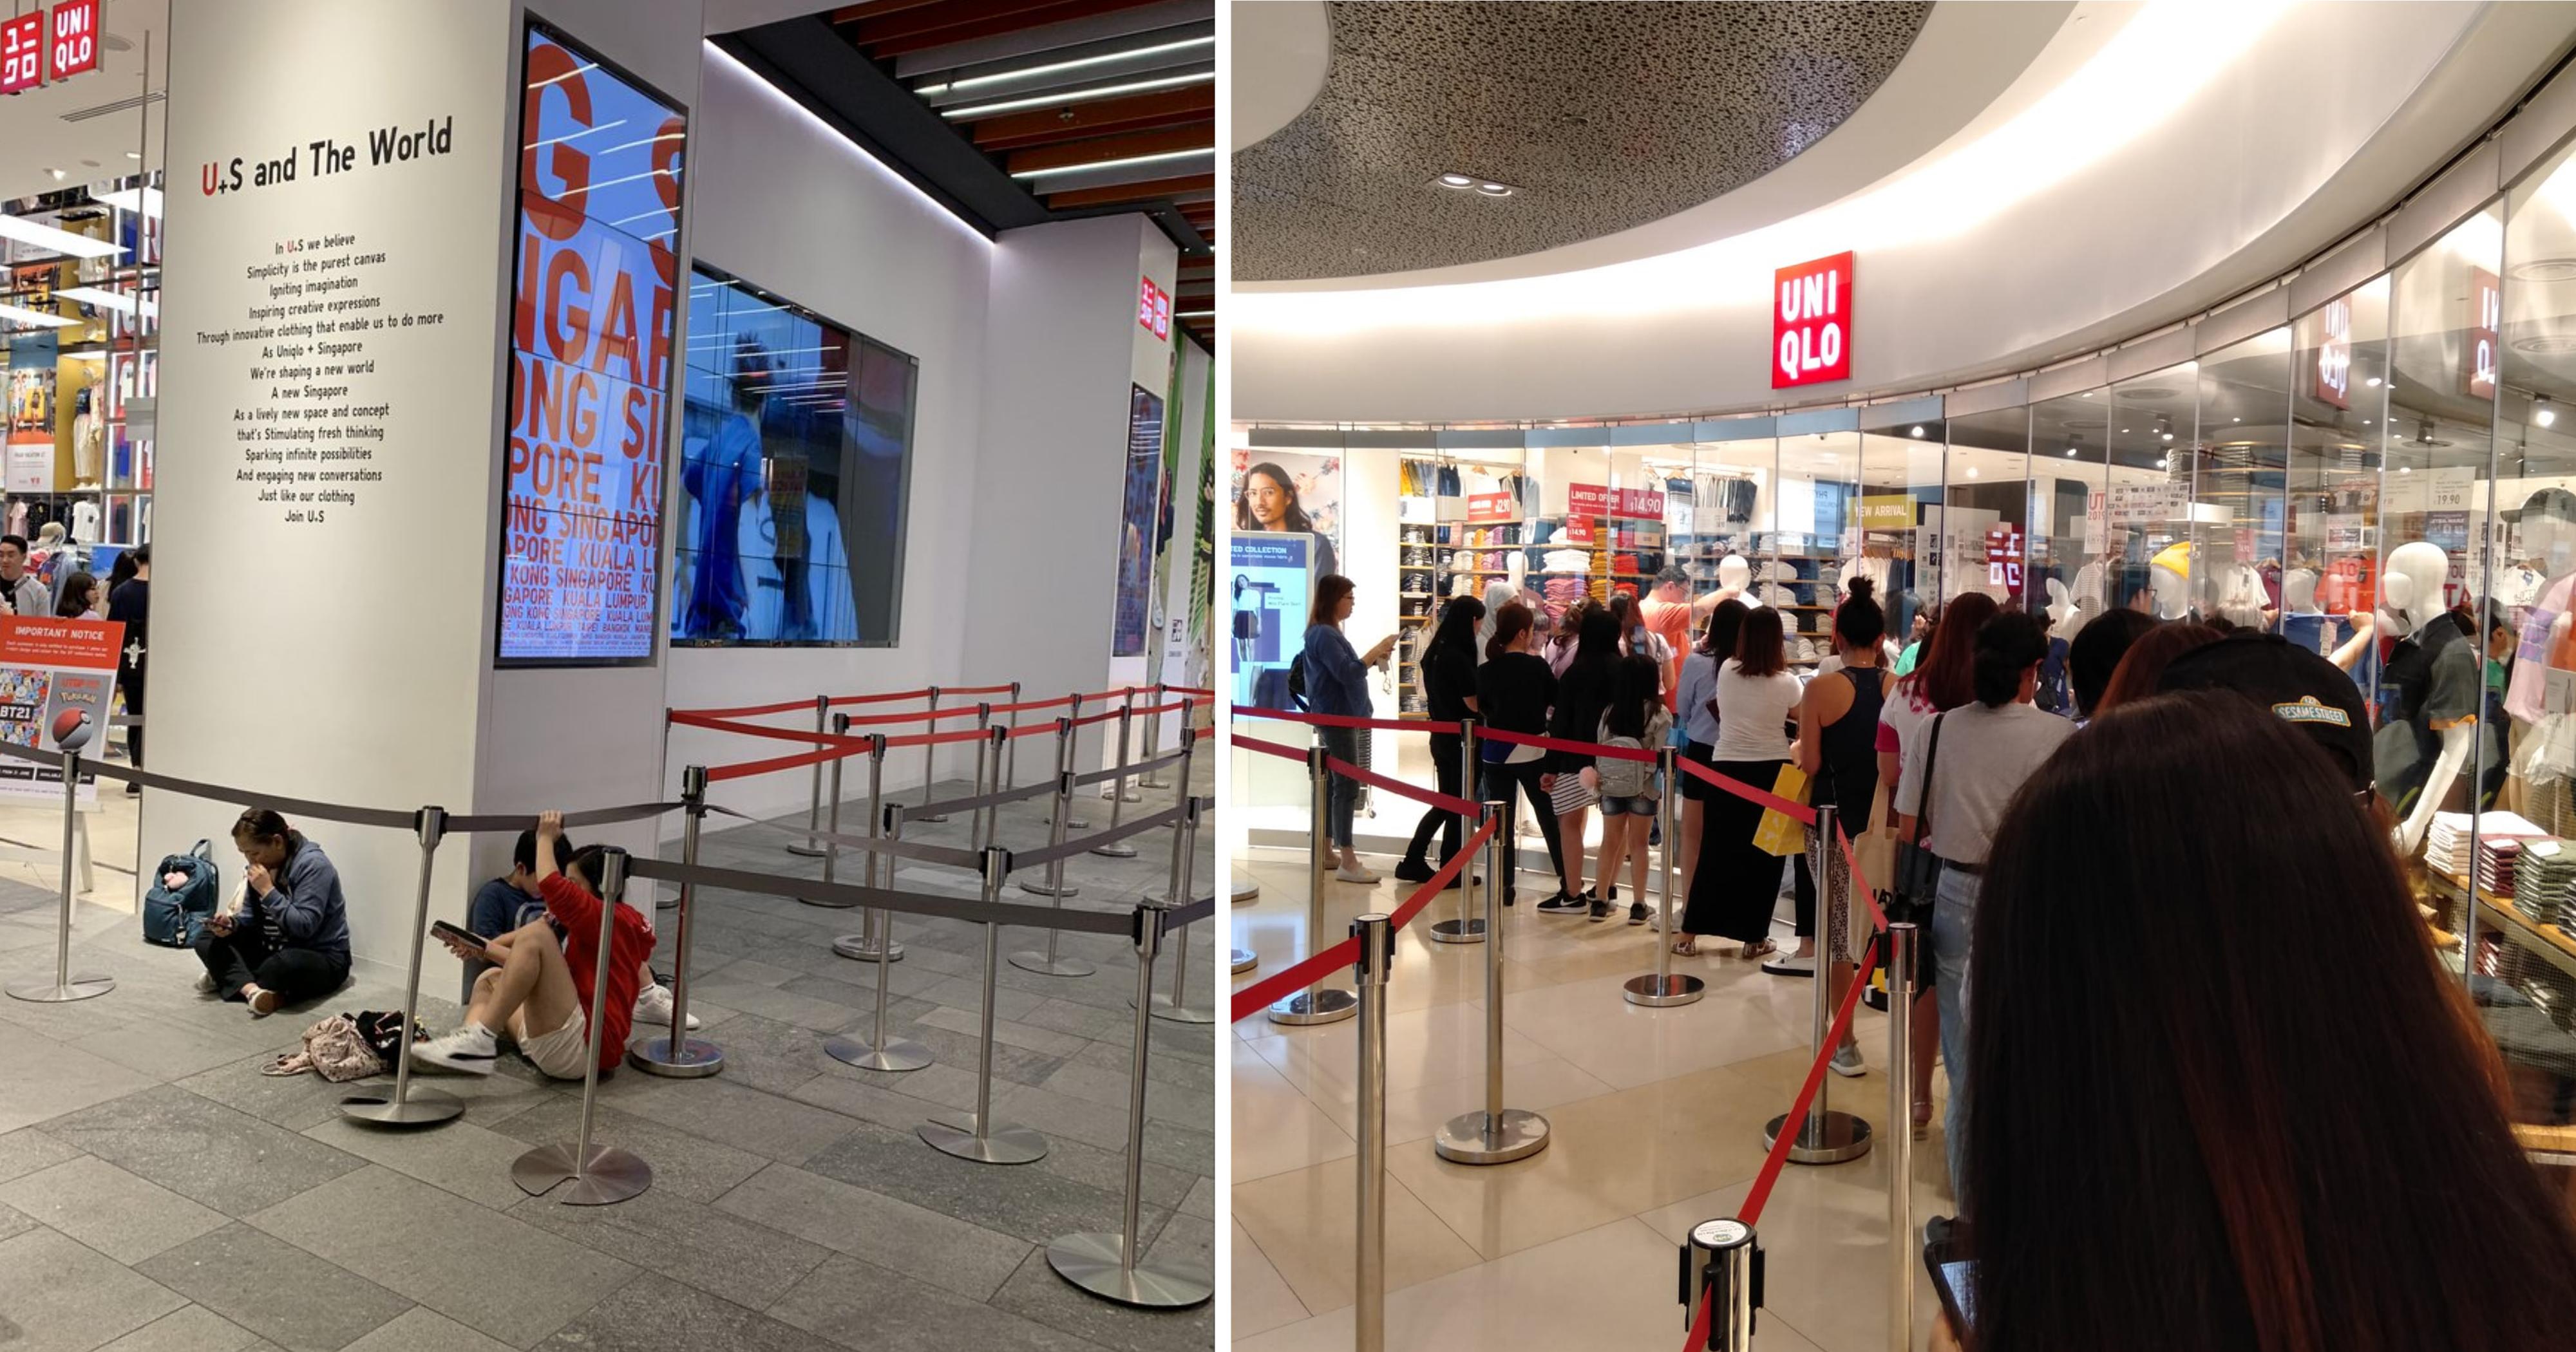 S Pore Bts Fans Queue Up Overnight To Get Bt21 Uniqlo T Shirts Mothership Sg News From Singapore Asia And Around The World